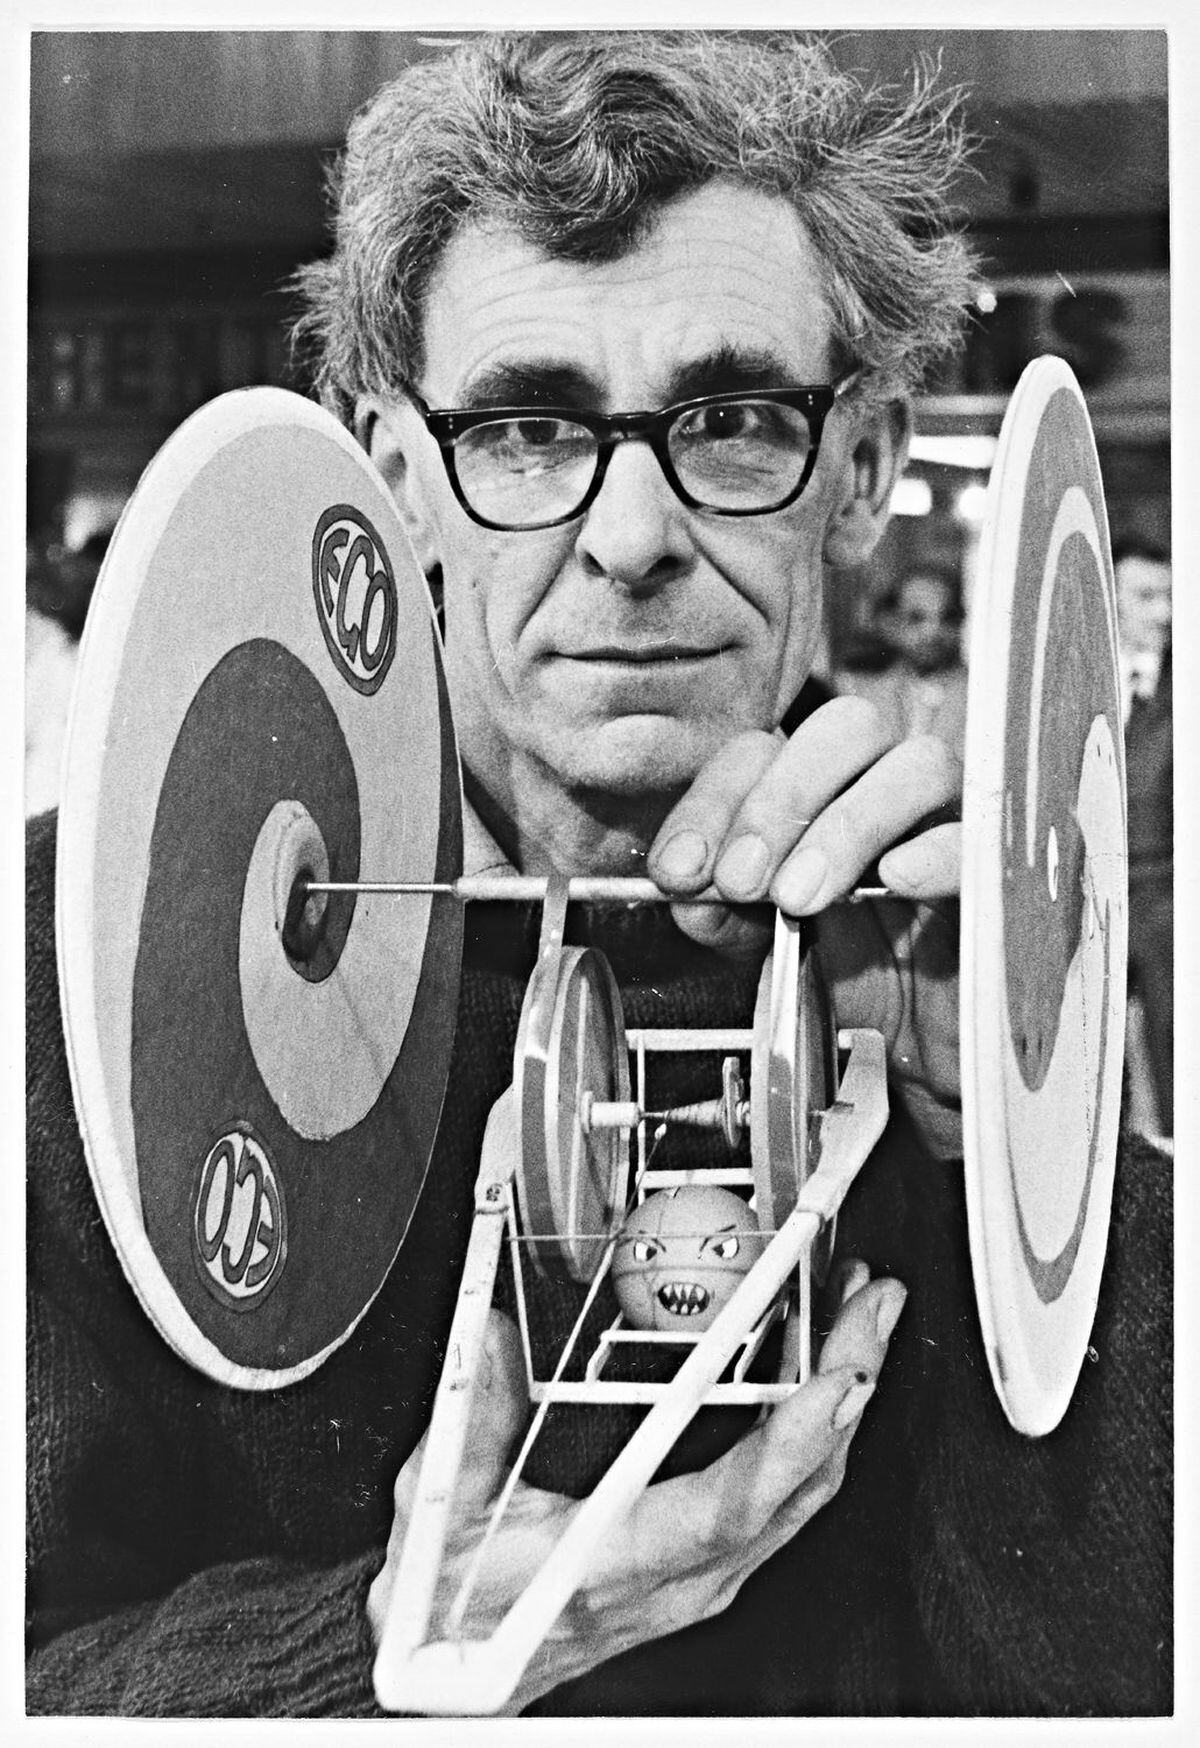 May 23, 1978: BBC TV and local radio staged the Birmingham regional heat of its Great Egg Race in New Street Station, hosted by comedian Don MacLean. Pictured is Professor David Turner of Warwick University.